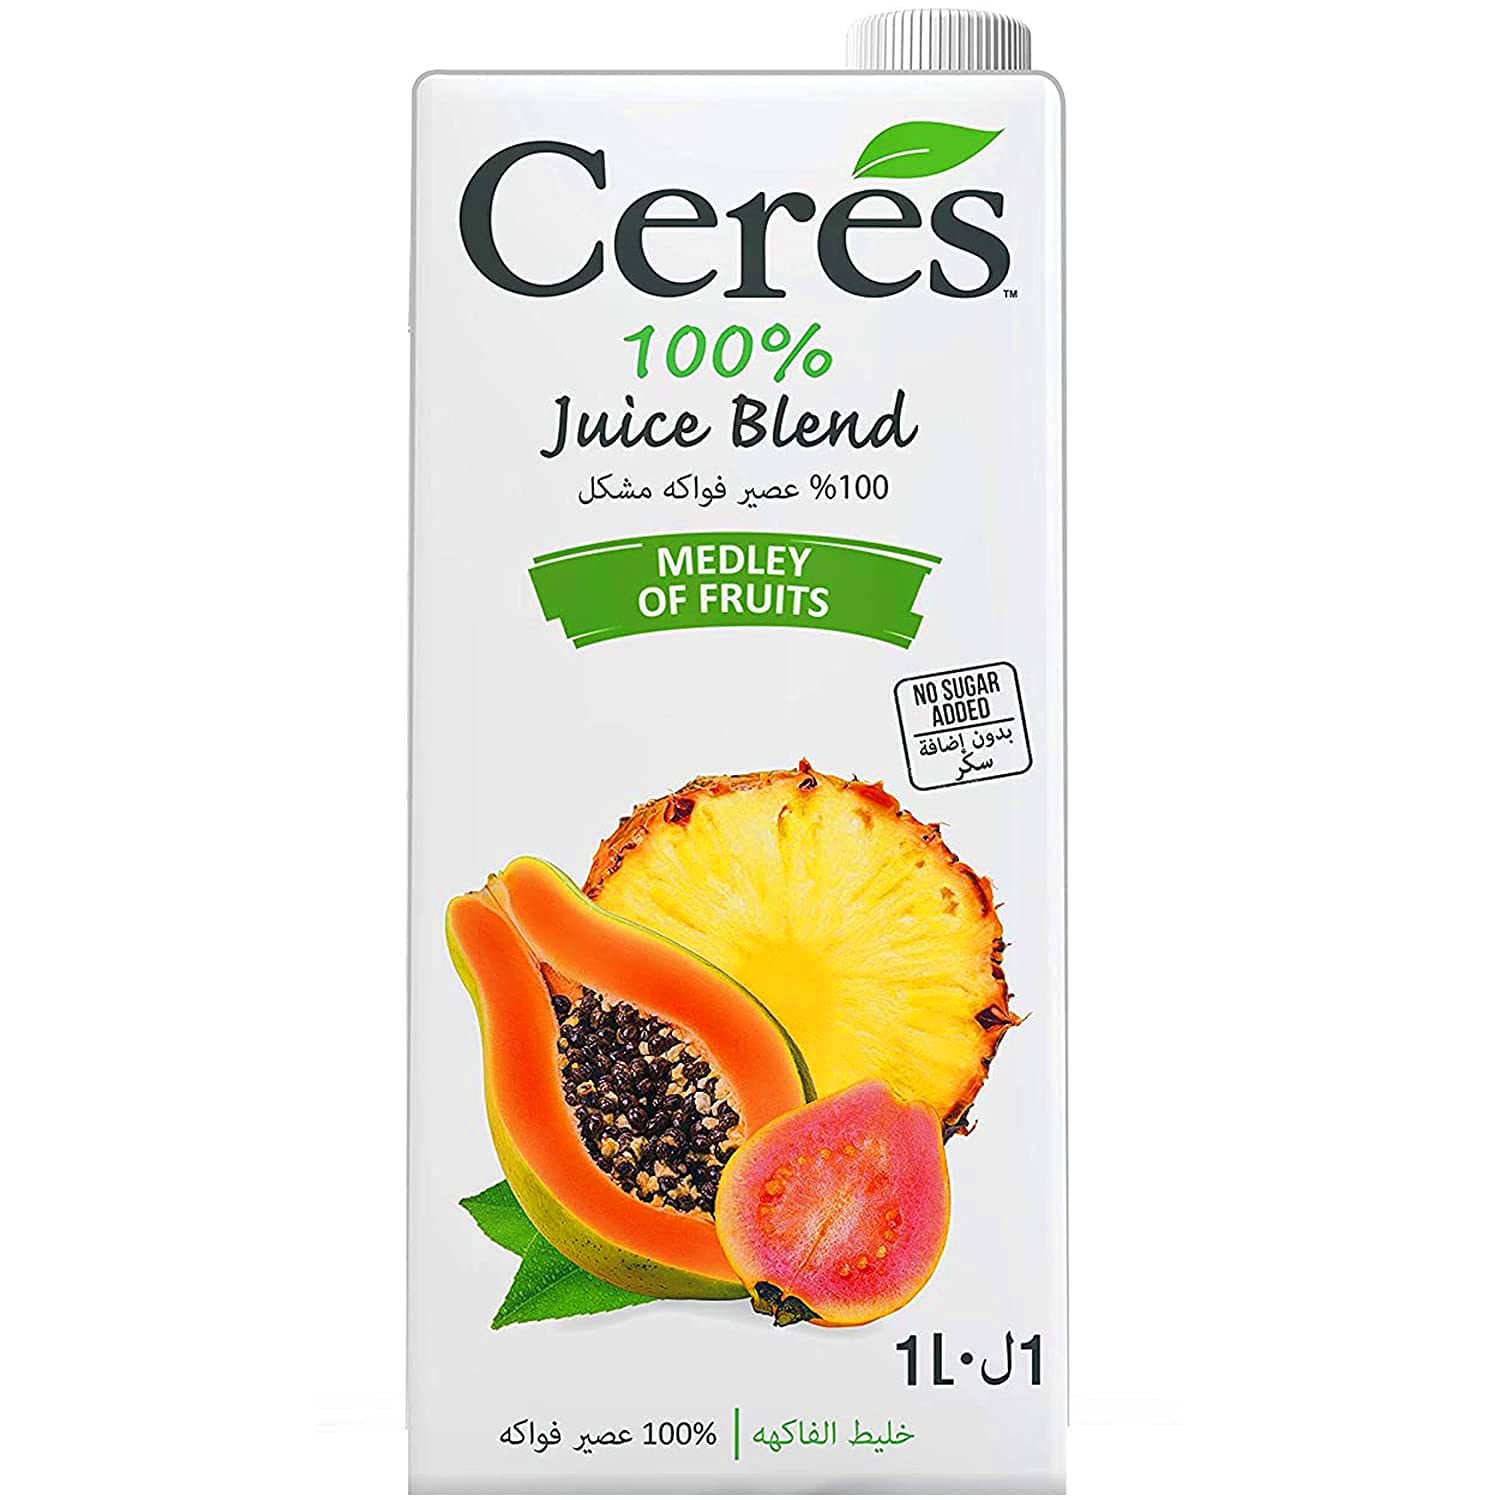 1 litre tetra pack of ceres medley of fruits